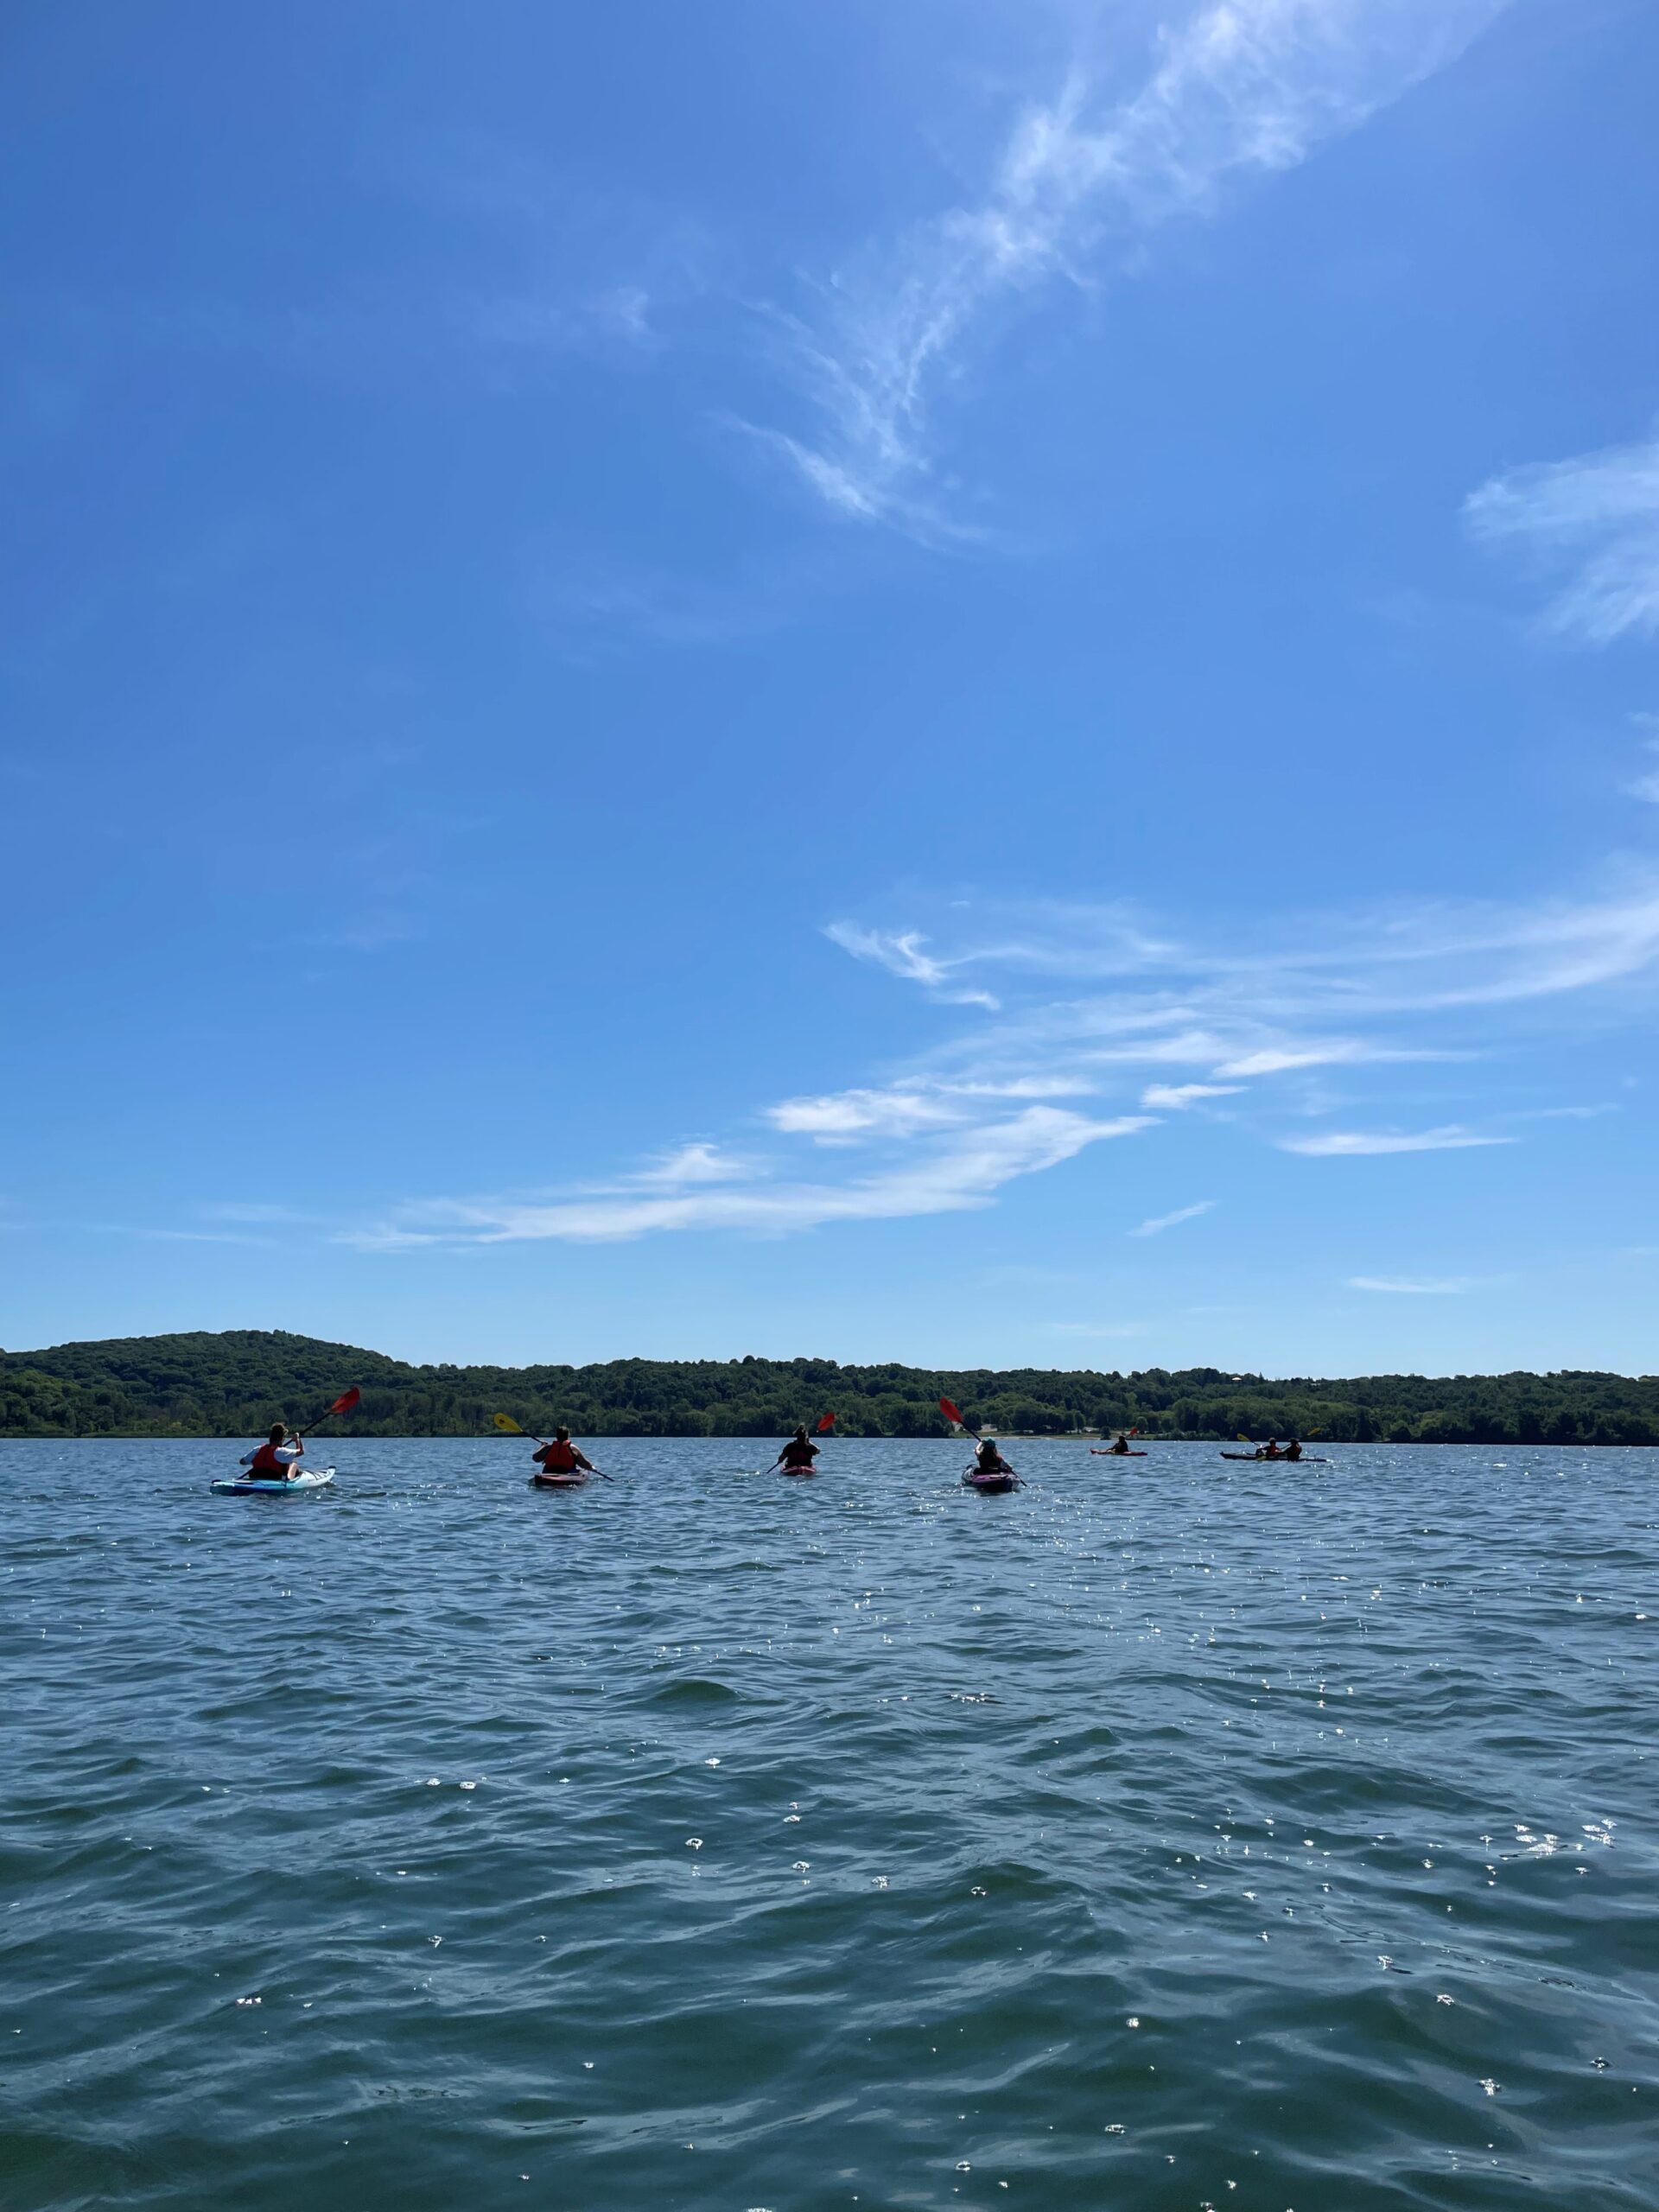 scenic view of kayaks on a lake in the distance with a clear blue sky above